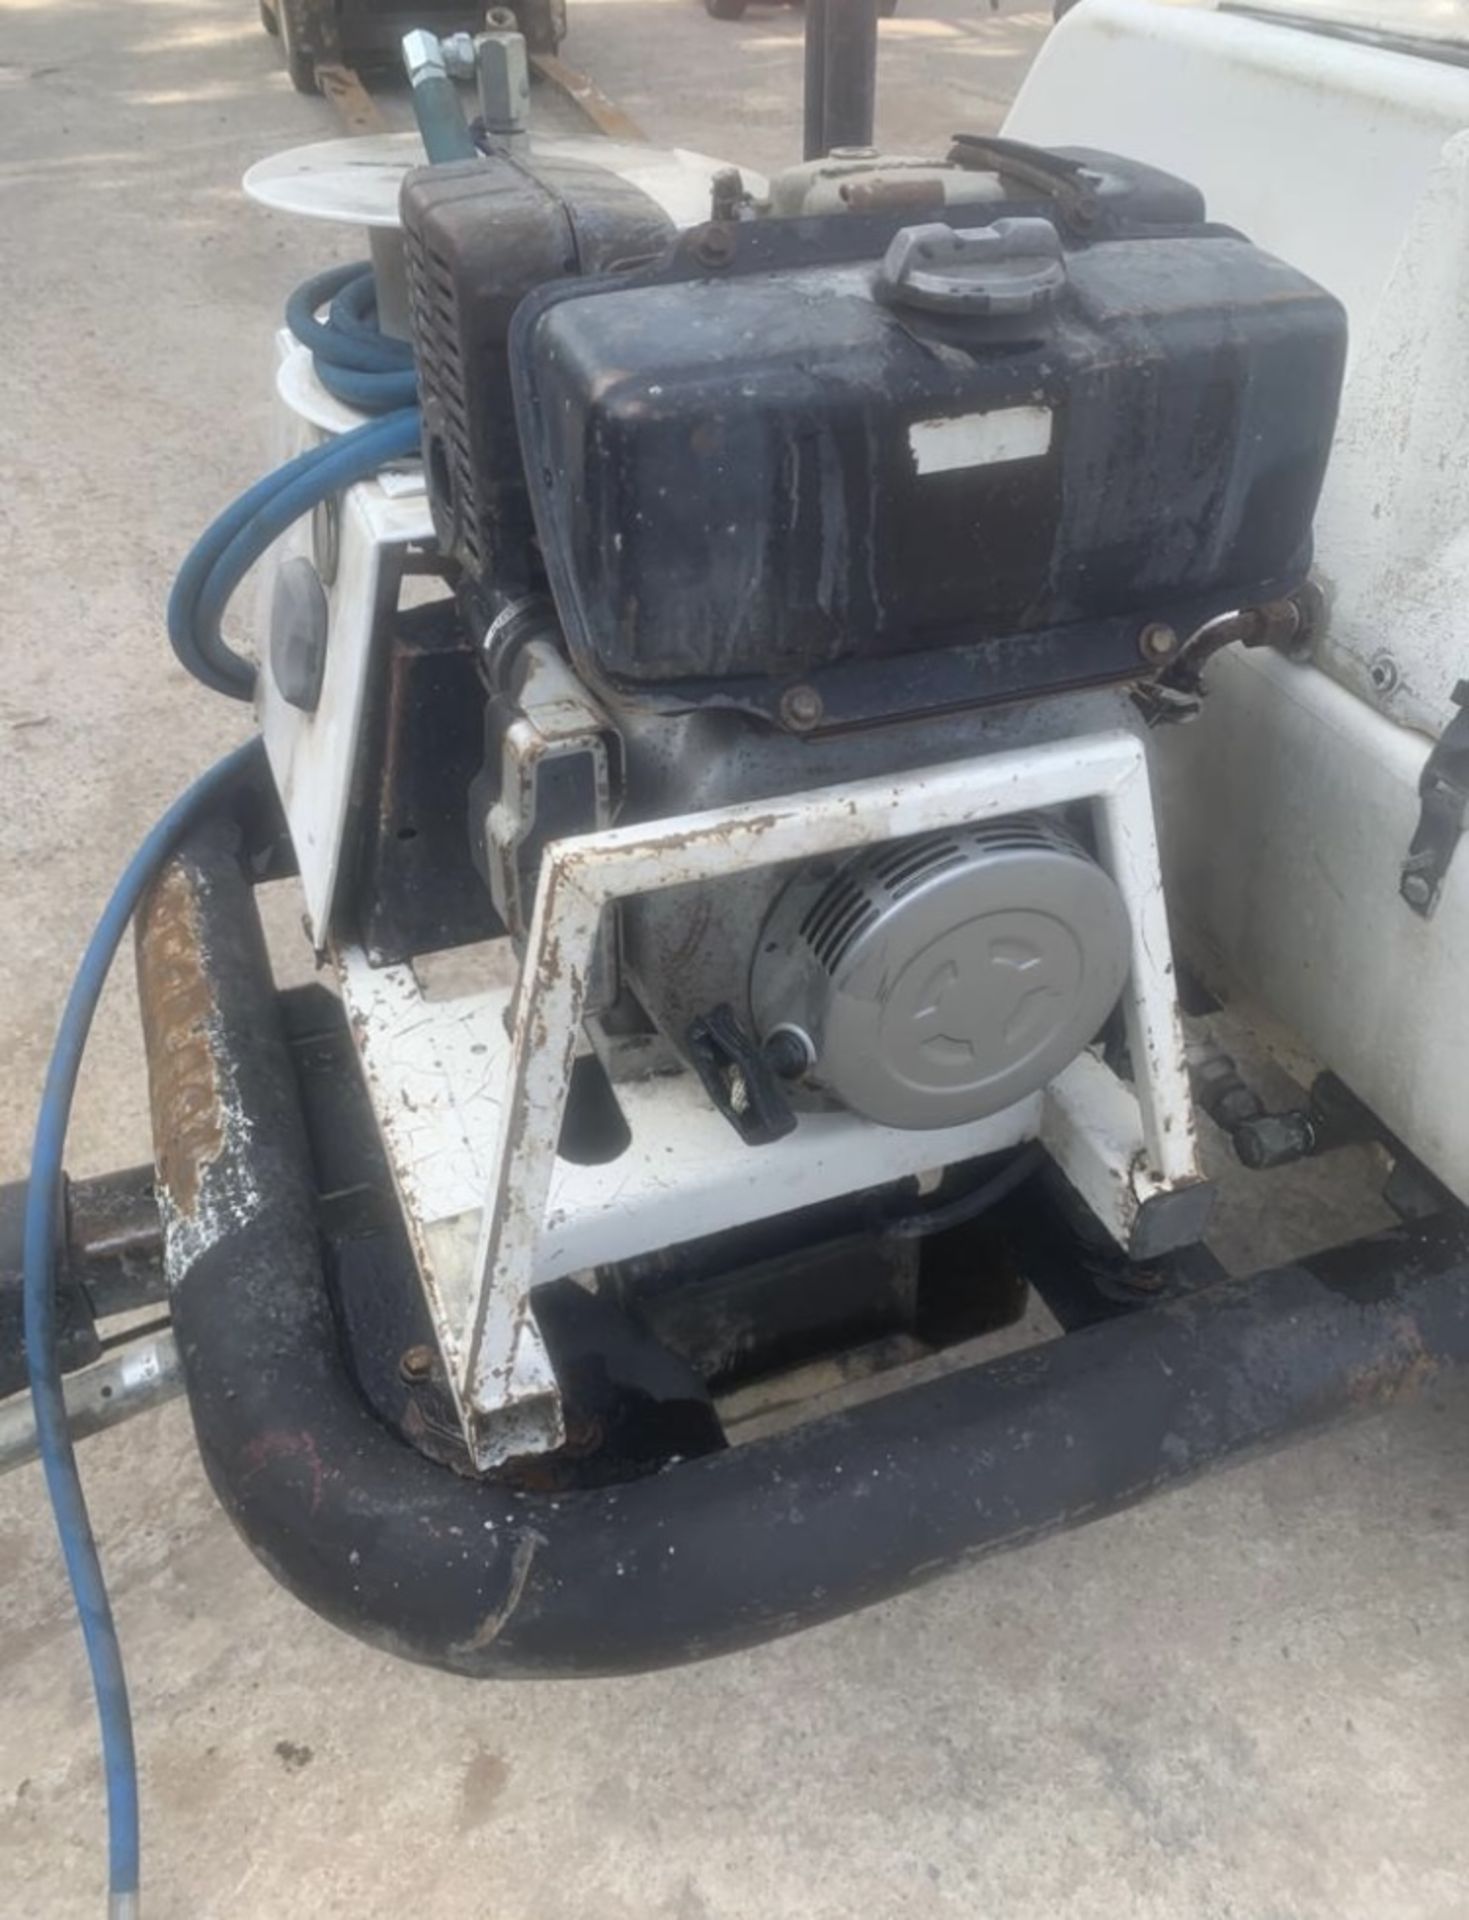 HONDA DIESEL TOWABLE BOWSER.PRESSURE WASHER.LOCATION NORTHERN IRELAND. - Image 4 of 4